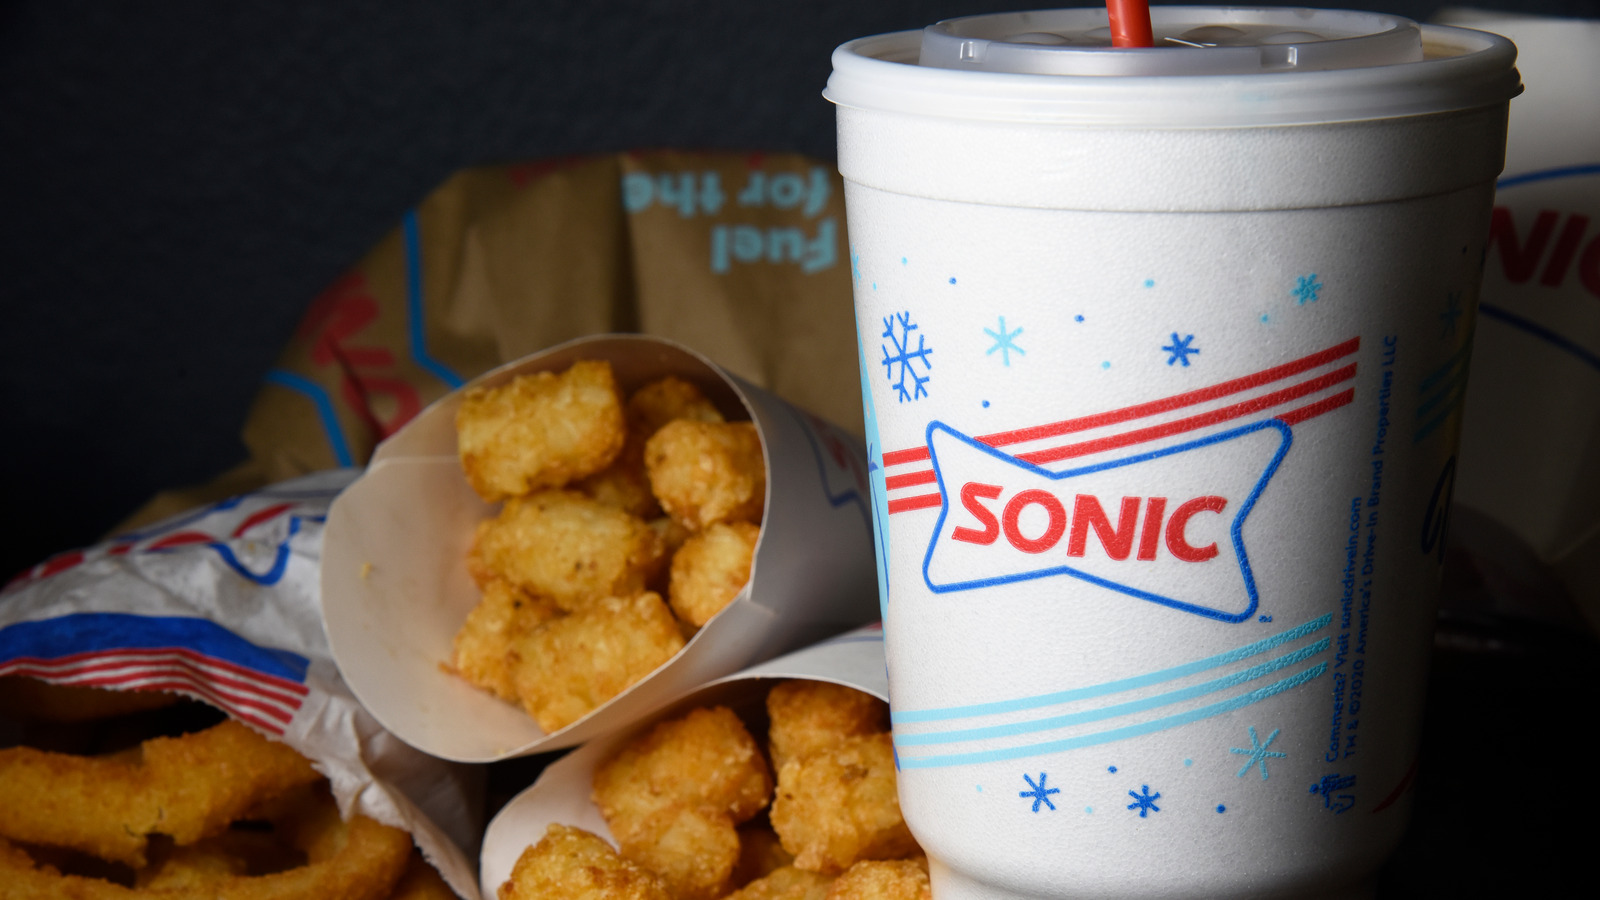 What Makes Sonic's Ice Cubes Different